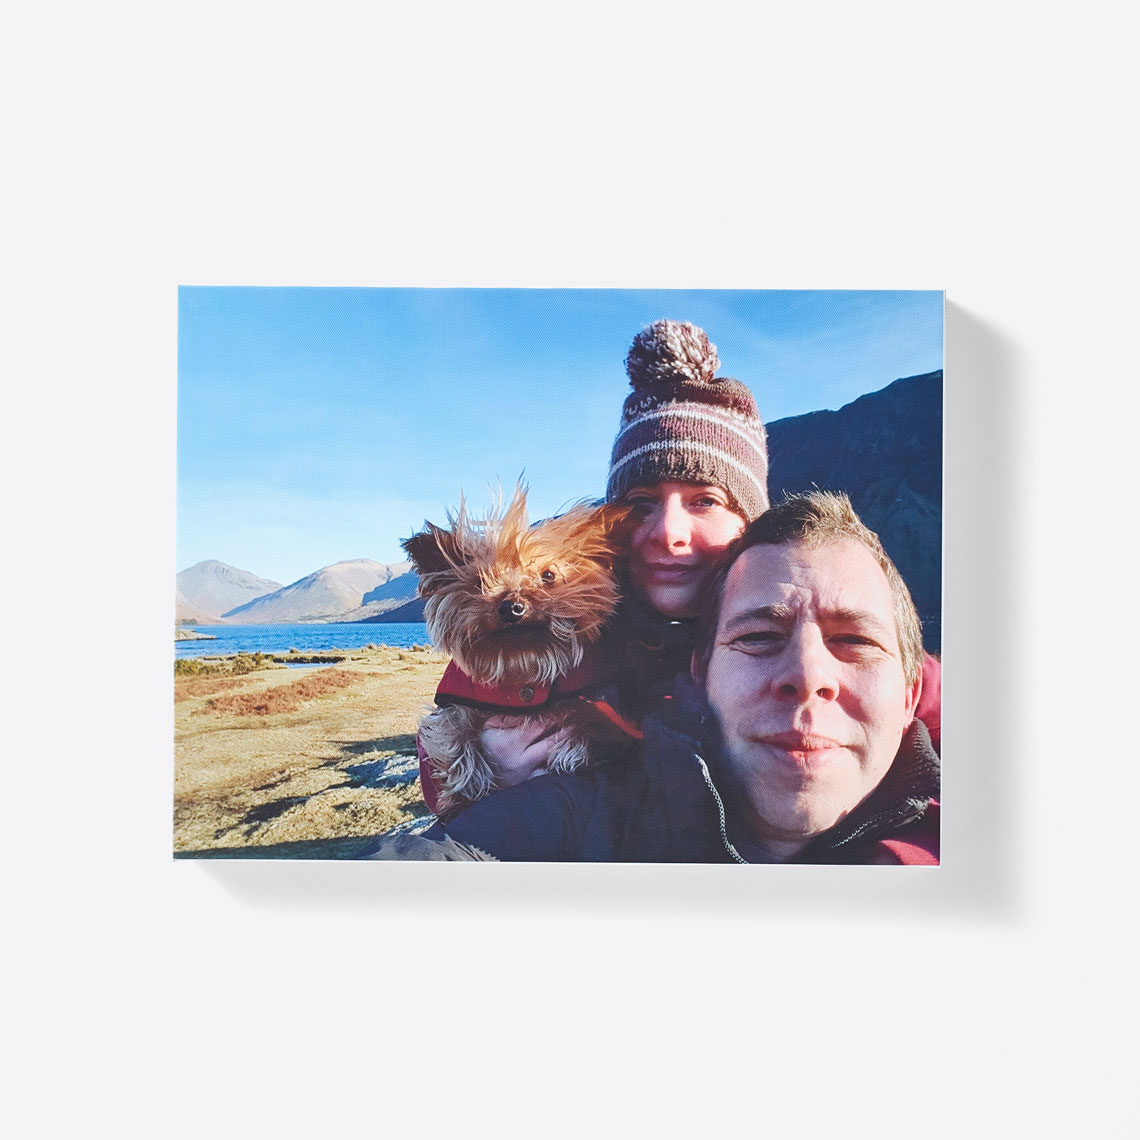 An image of Personalised 16" x 20" Premium Canvas Photo Print | By Truprint